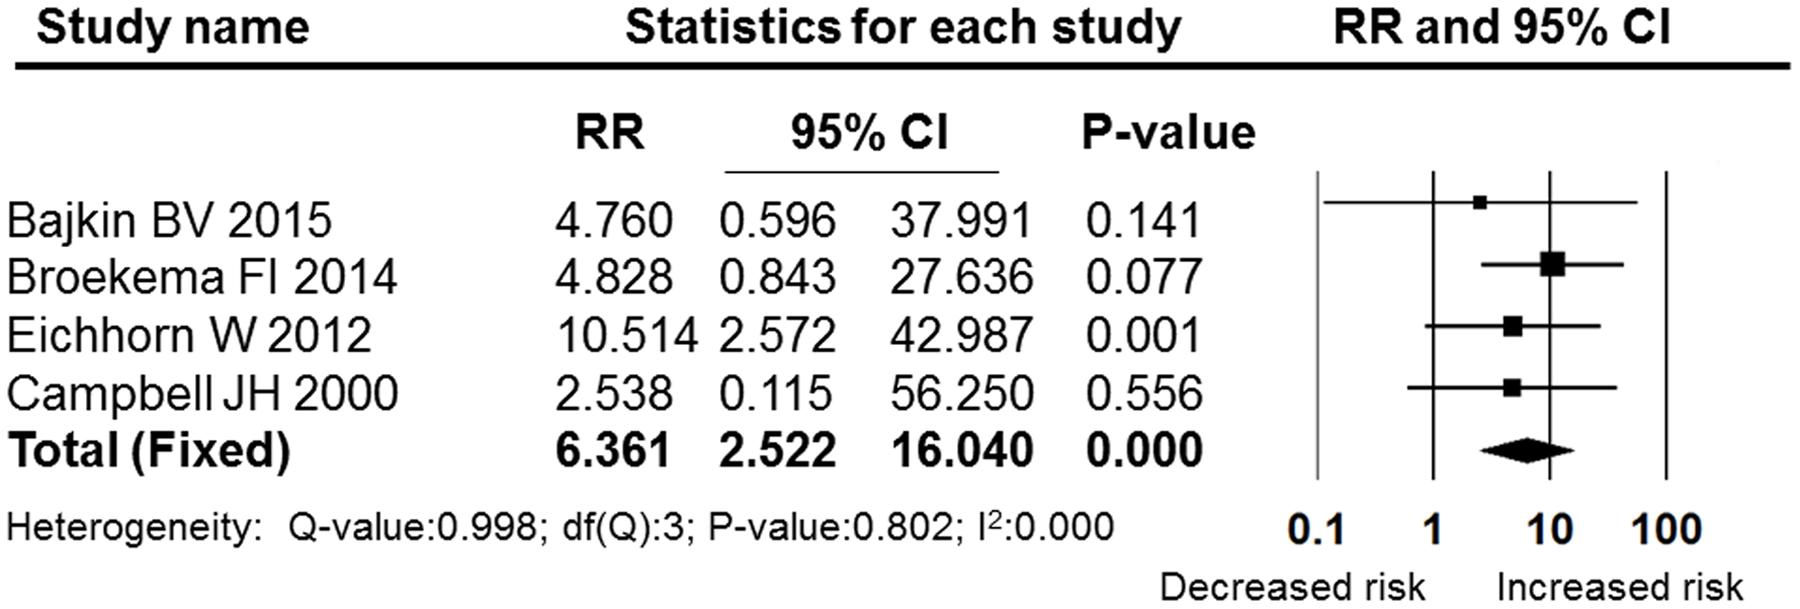 Frontiers Post Operative Bleeding Risk In Dental Surgery For Patients On Oral Anticoagulant Therapy A Meta Analysis Of Observational Studies Pharmacology